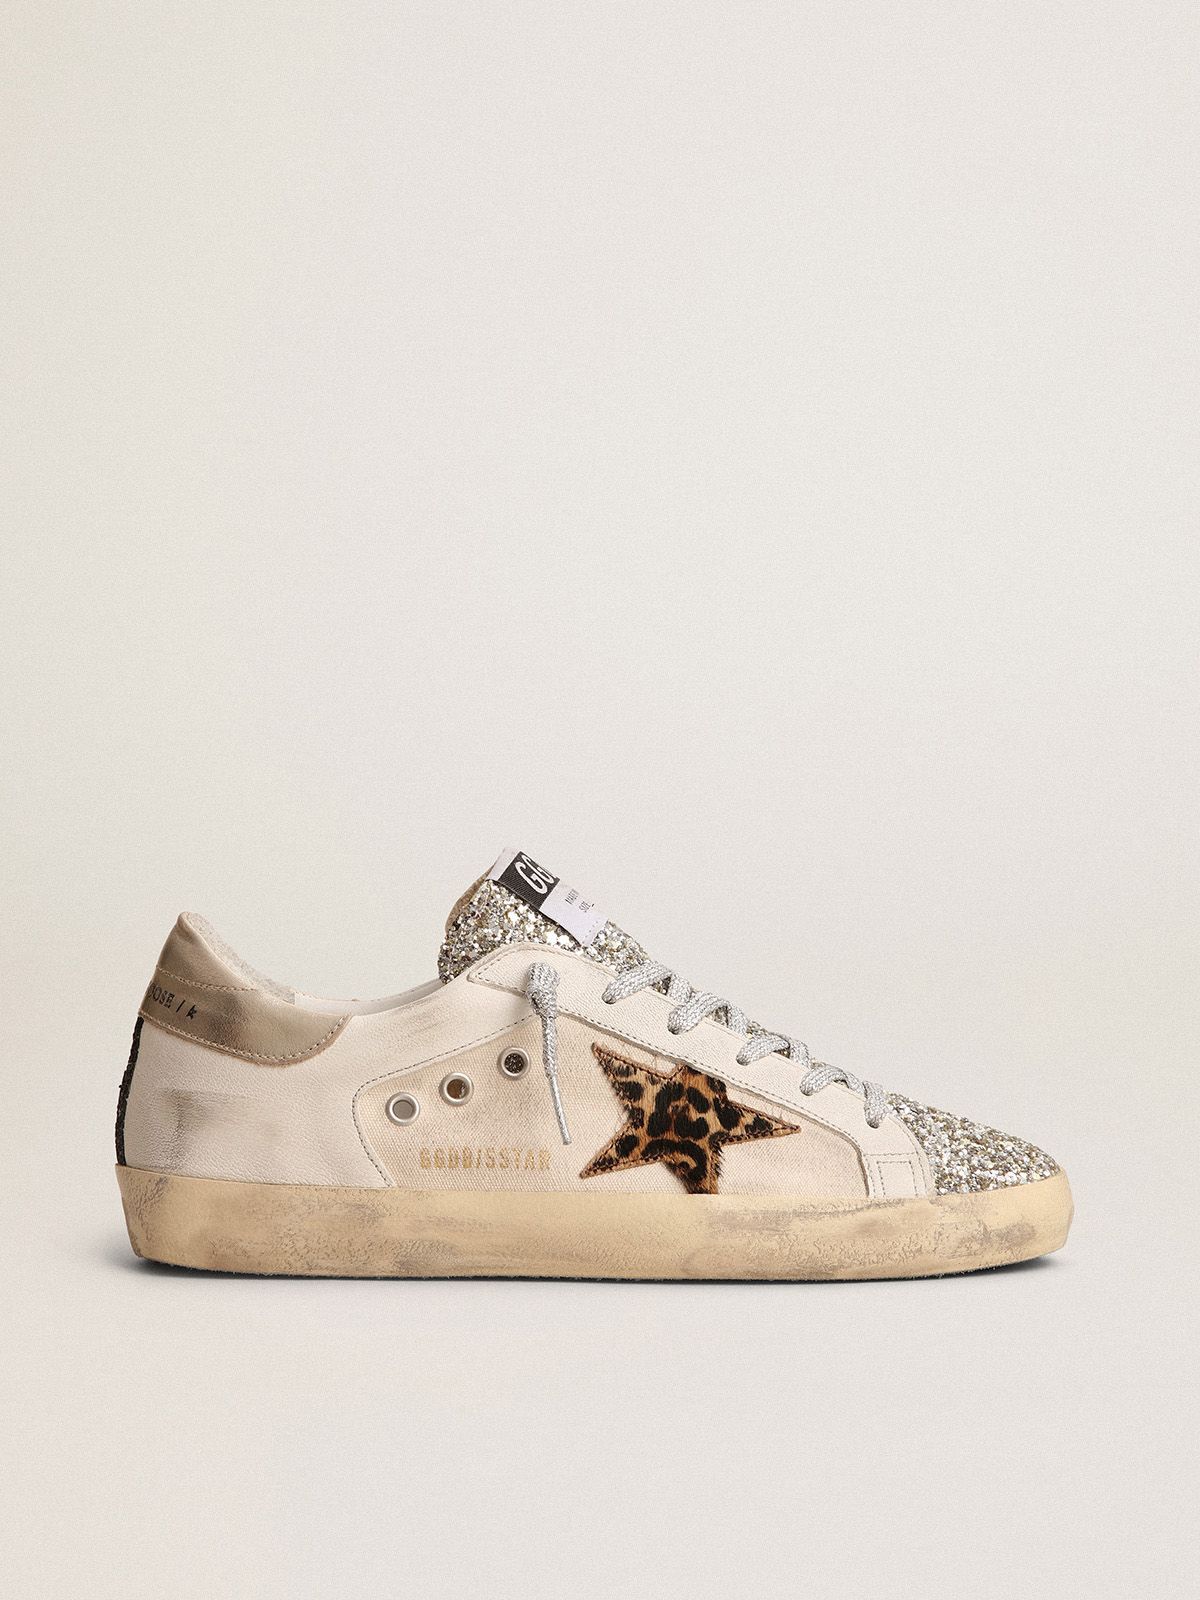 Super-Star sneakers with platinum-colored glitter tongue and leopard-print pony skin star | 